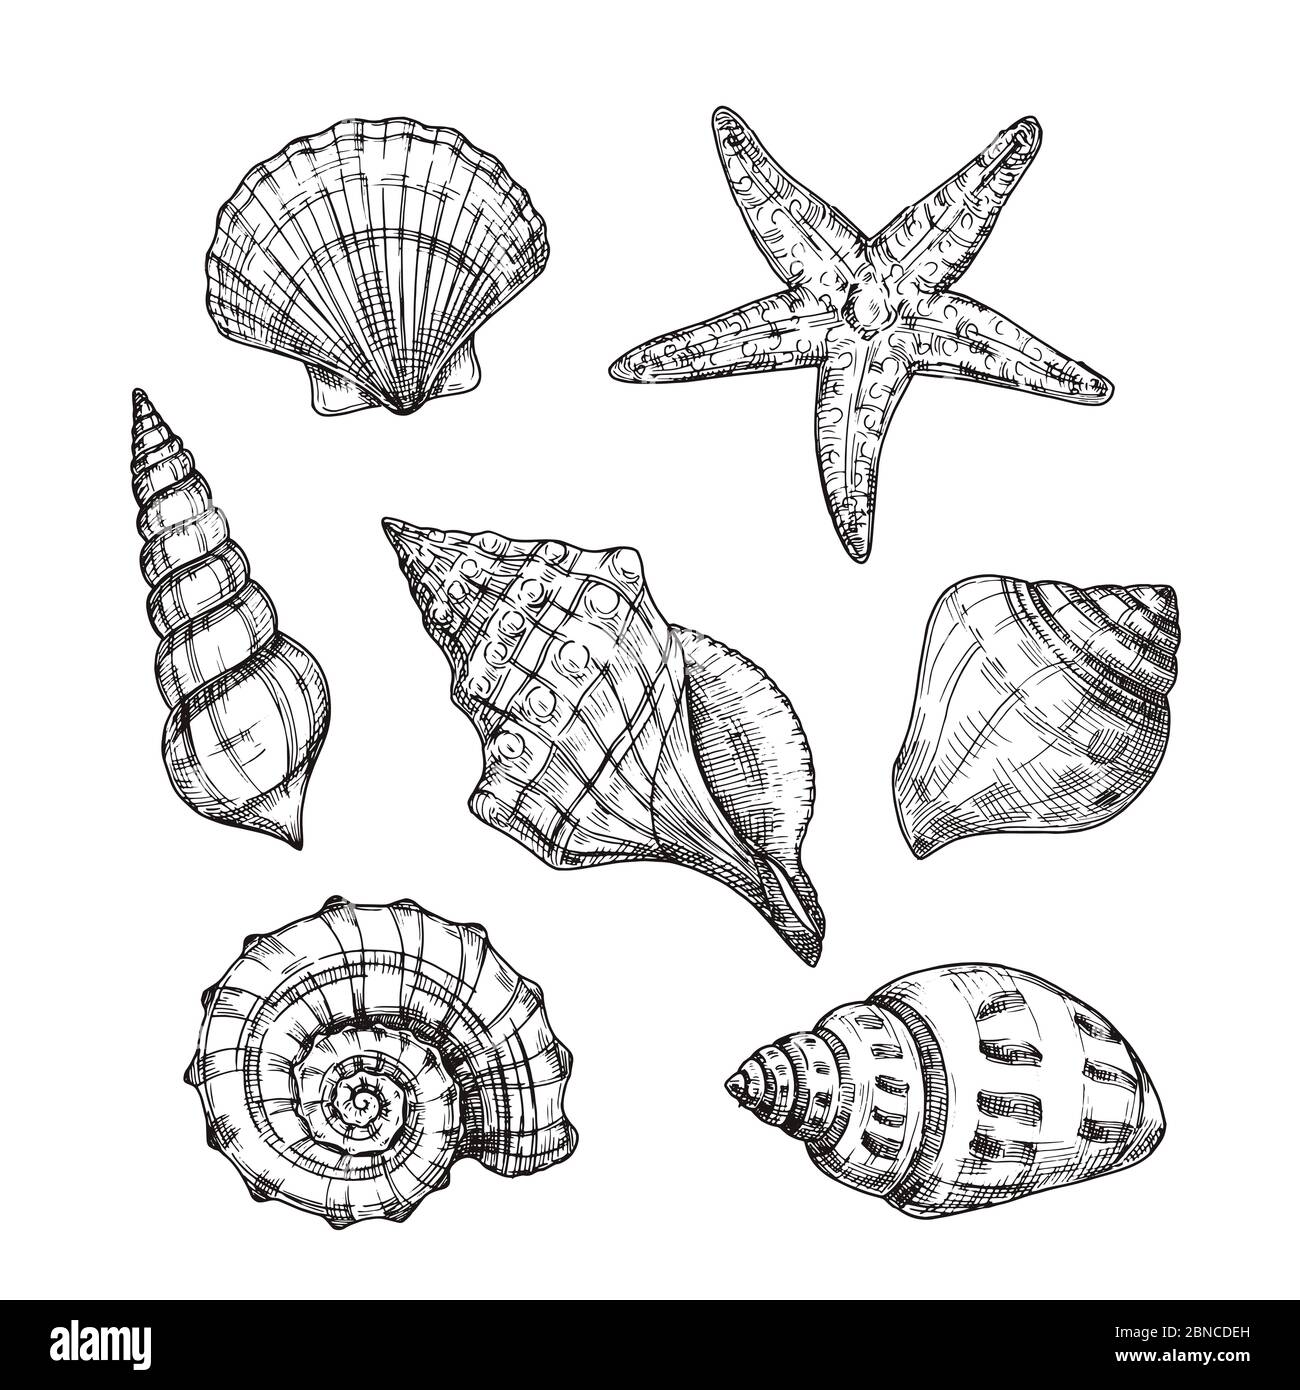 https://c8.alamy.com/comp/2BNCDEH/hand-drawn-sea-shells-starfish-shellfish-tropical-mollusk-in-vintage-engraving-style-seashell-isolated-vector-collection-illustration-of-shellfish-and-starfish-drawing-2BNCDEH.jpg